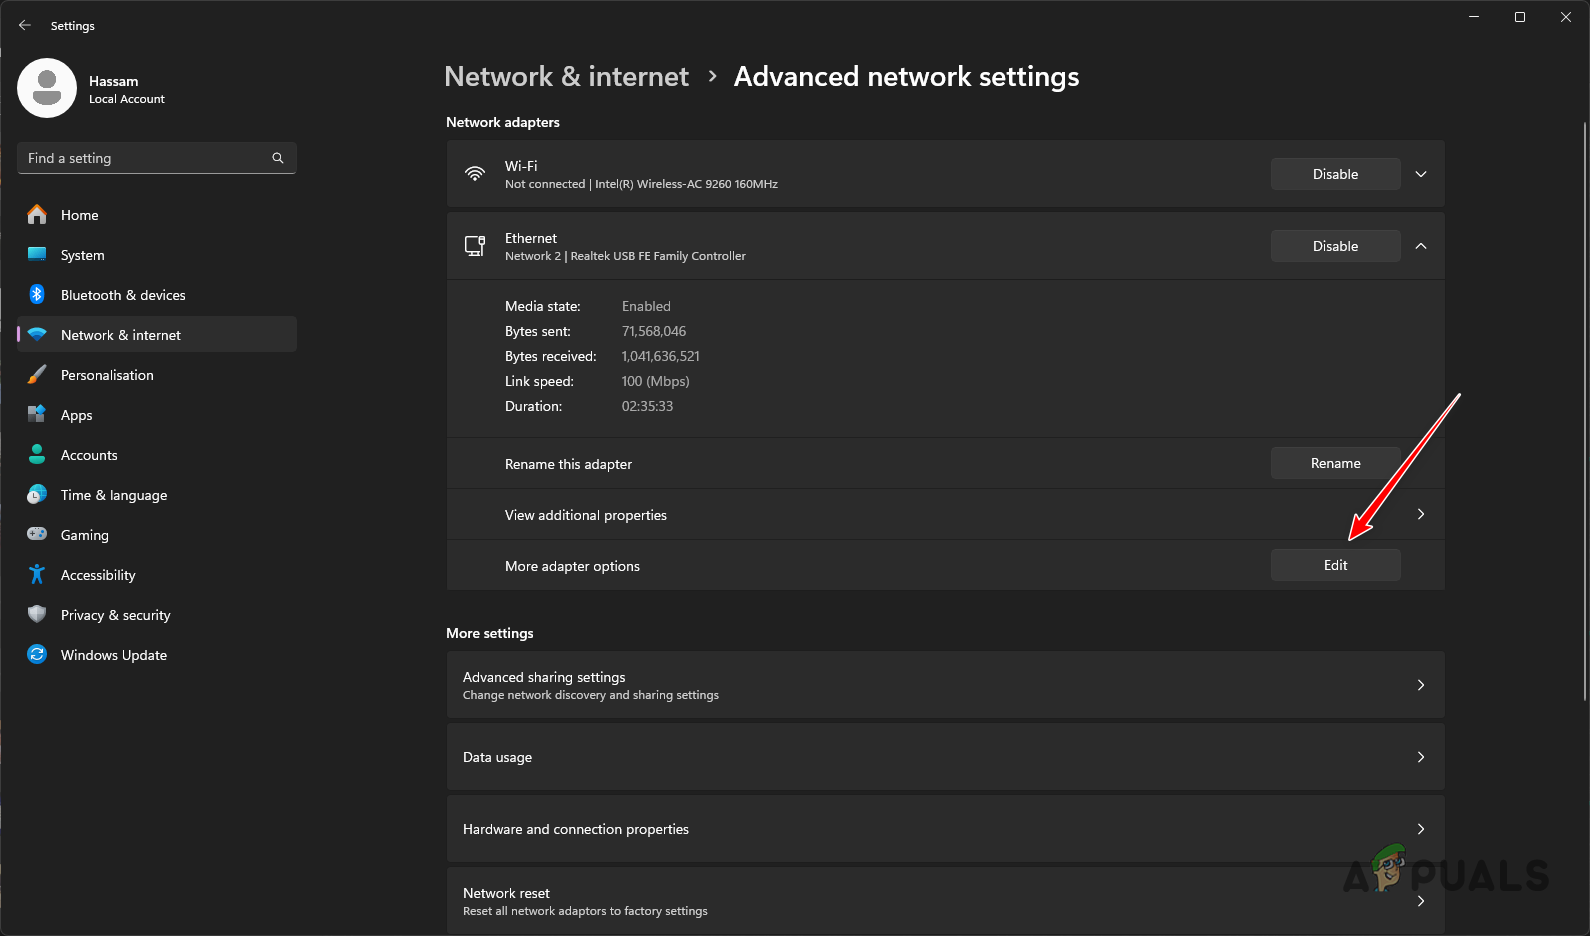 Opening Additional Network Adapter Options